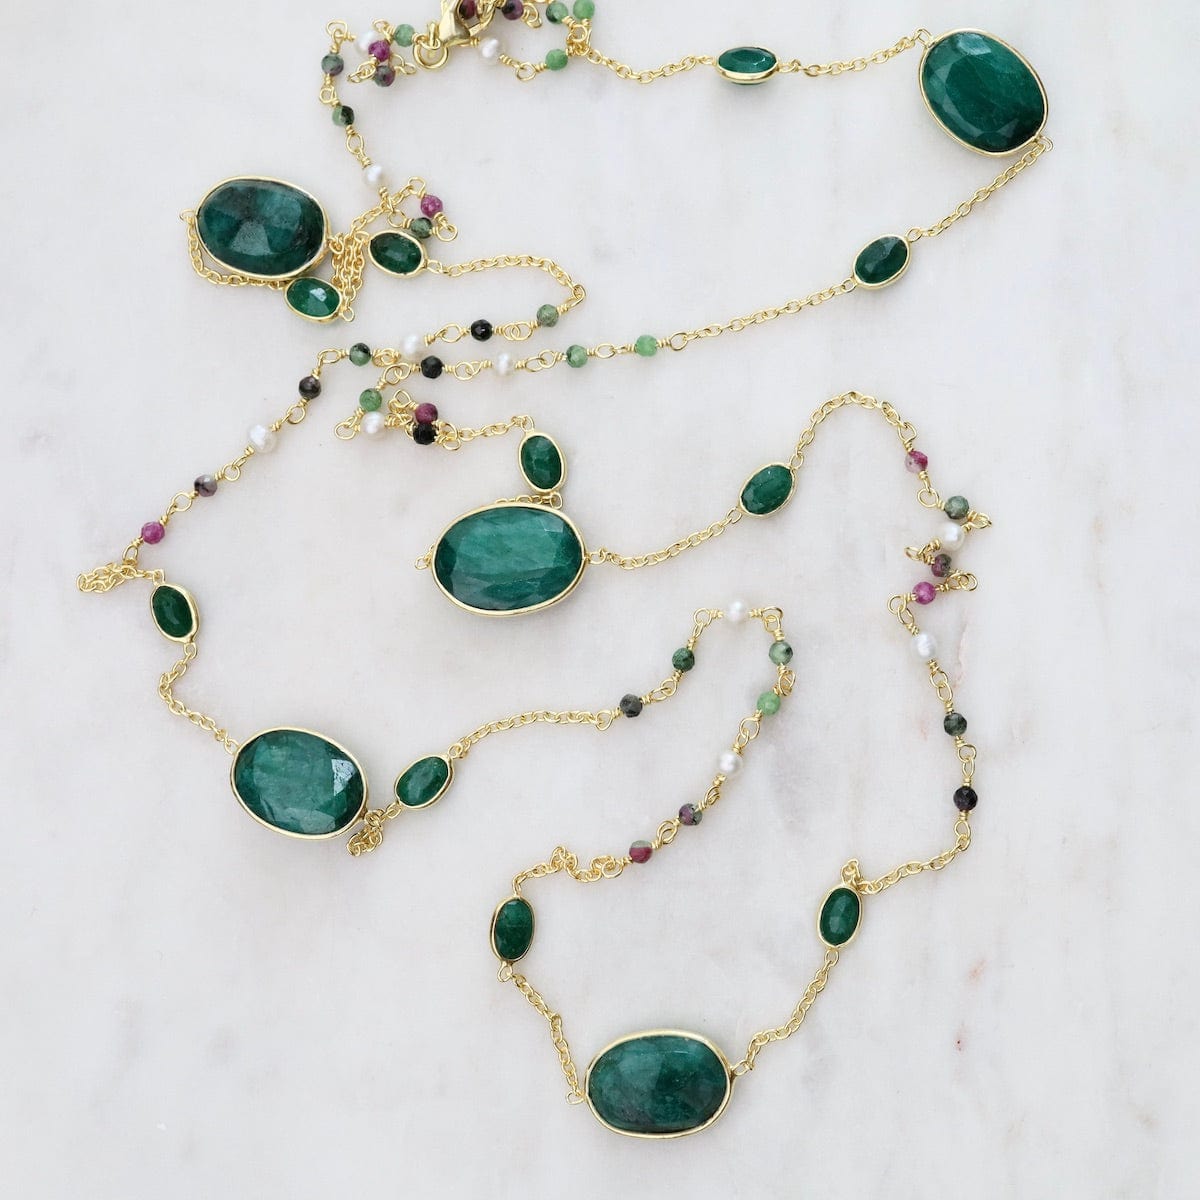 NKL-GPL Green Gemstone & Pearl Long Necklace